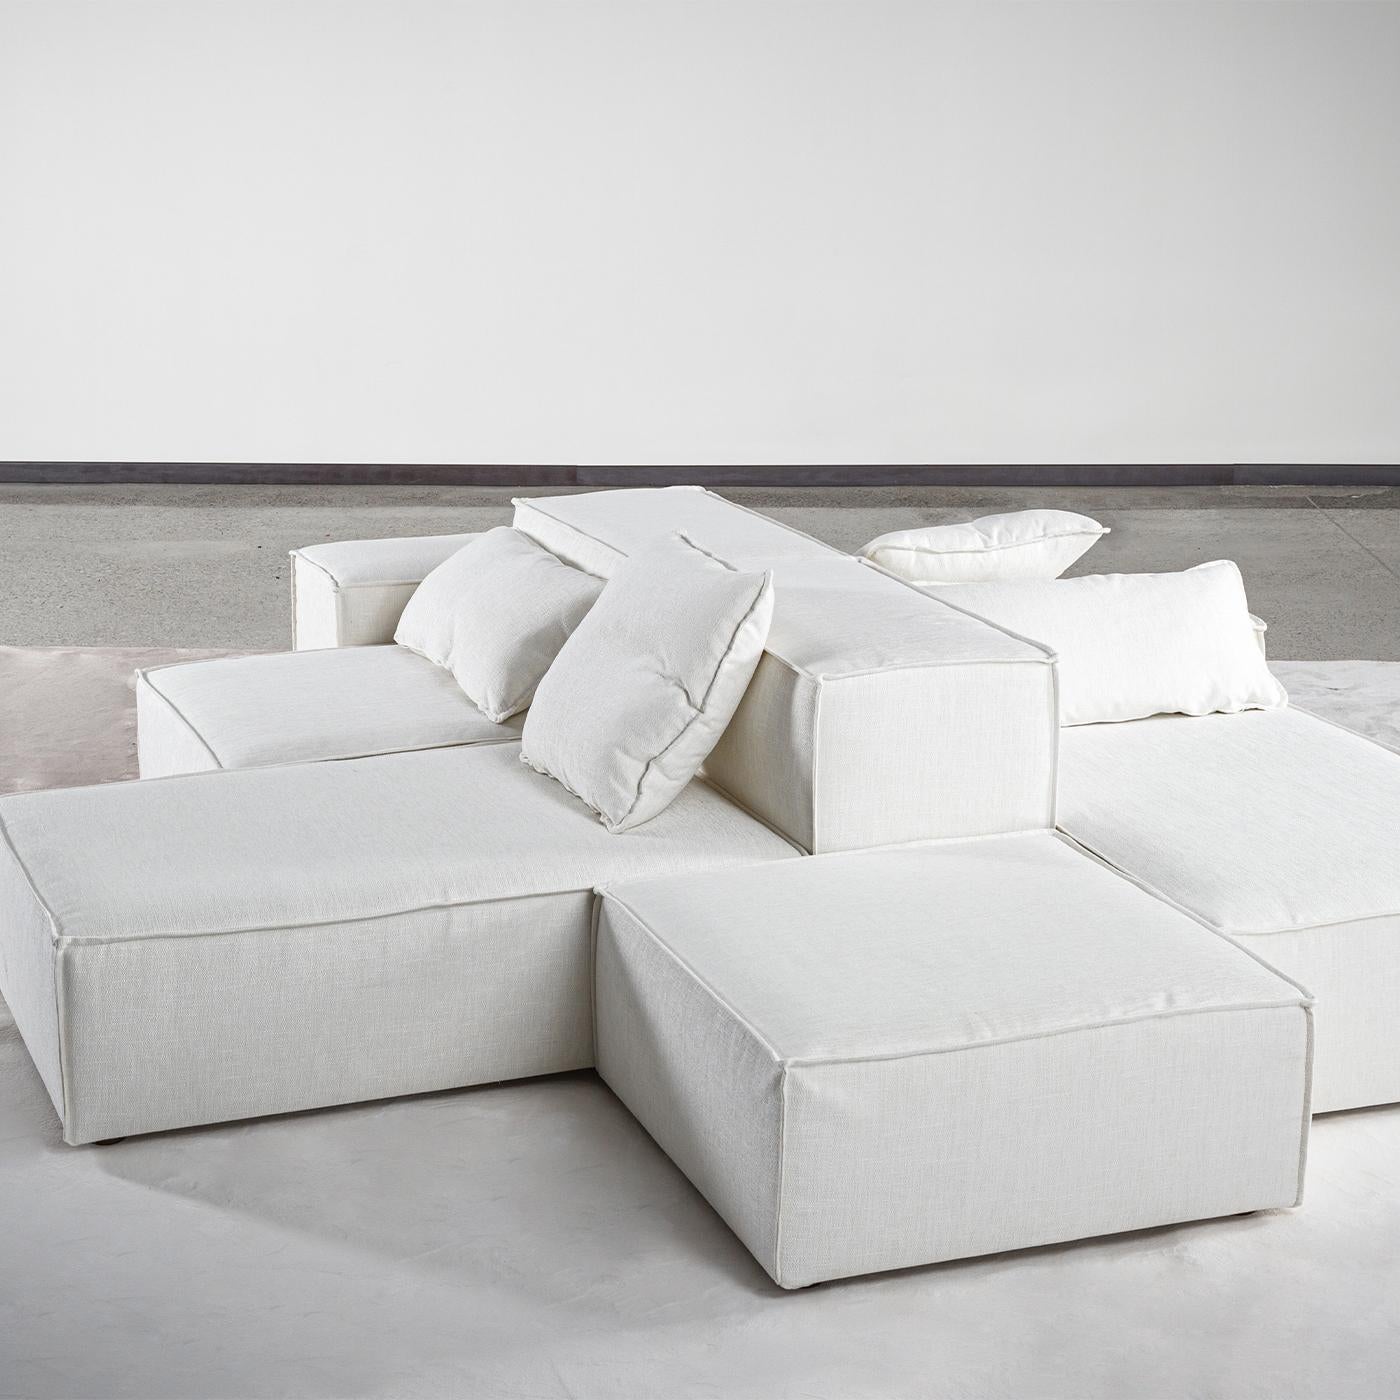 This soft modular white 100% Italian sofa combines great comfort and a unique geometrical pattern. Composed by different pieces of furniture connected by specific hooks, it features a minimal design enhanced by sartorial touches such as the pinched